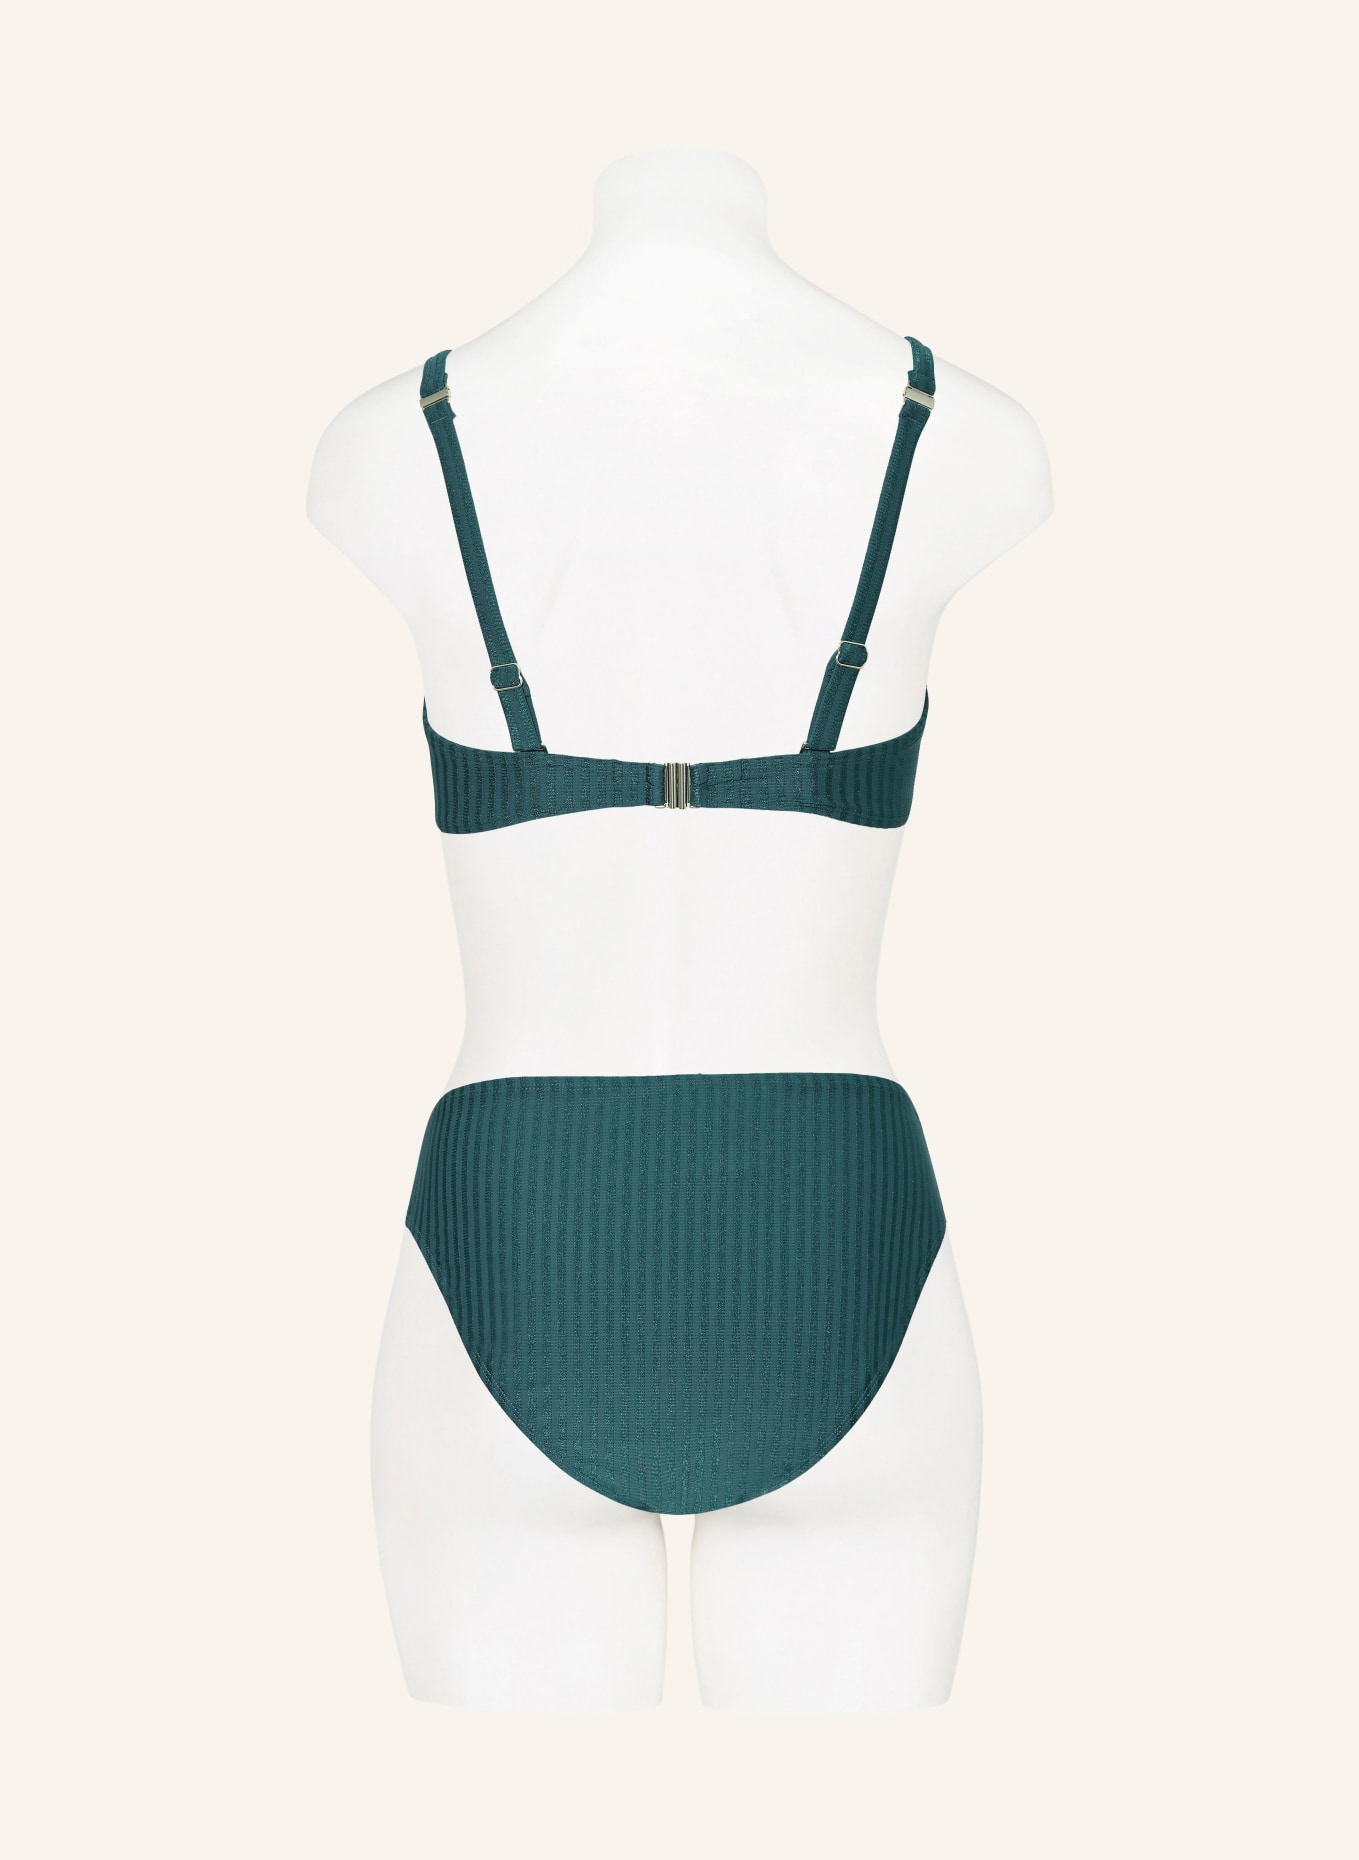 BEACHLIFE Underwired bikini top REFLECTING POND, Color: TEAL (Image 3)